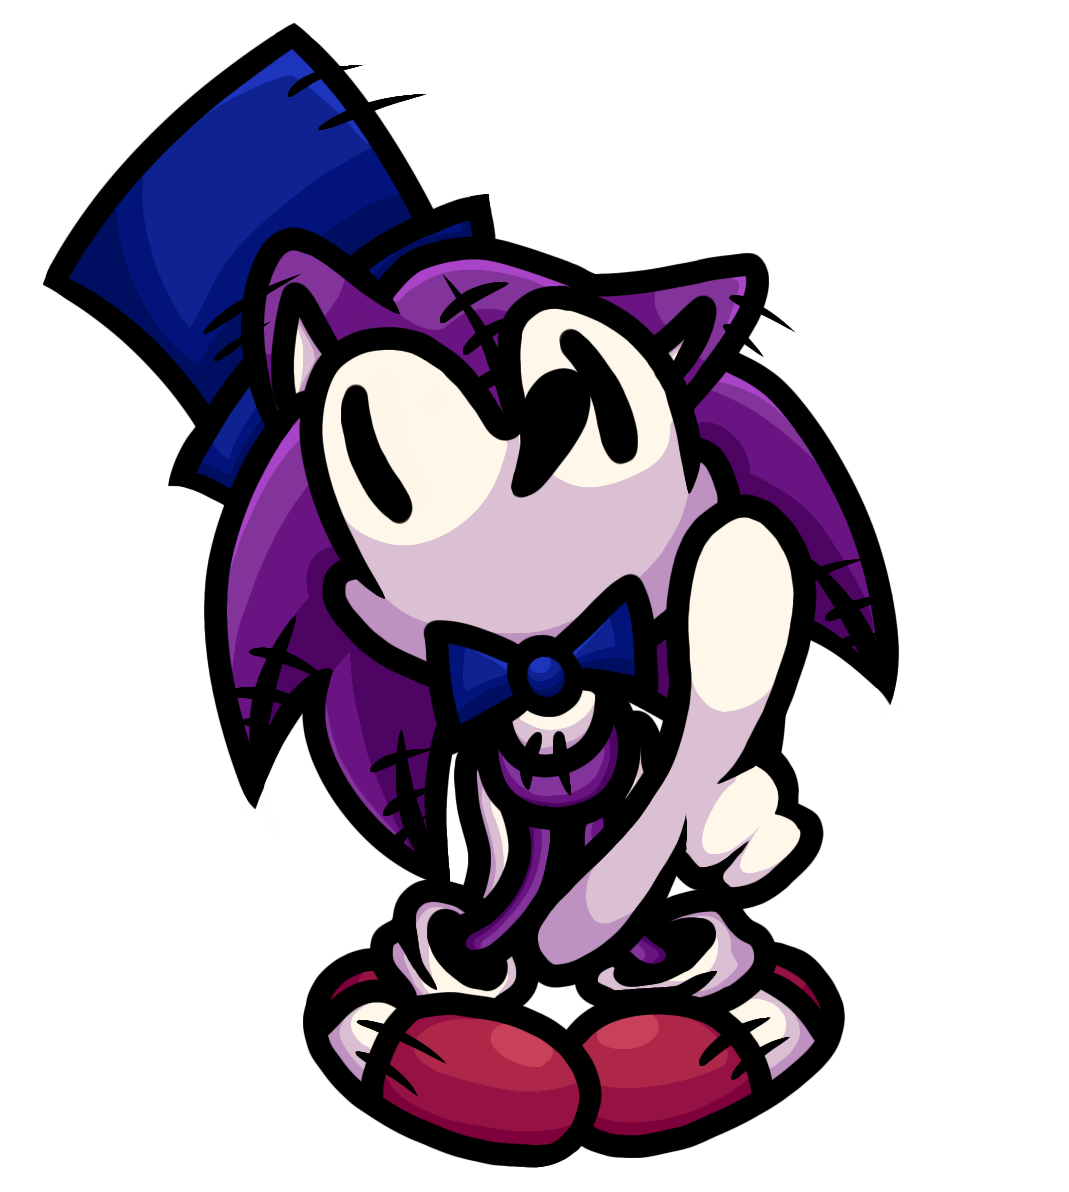 Lady Tails (LT), The Sonic Exe Wiki